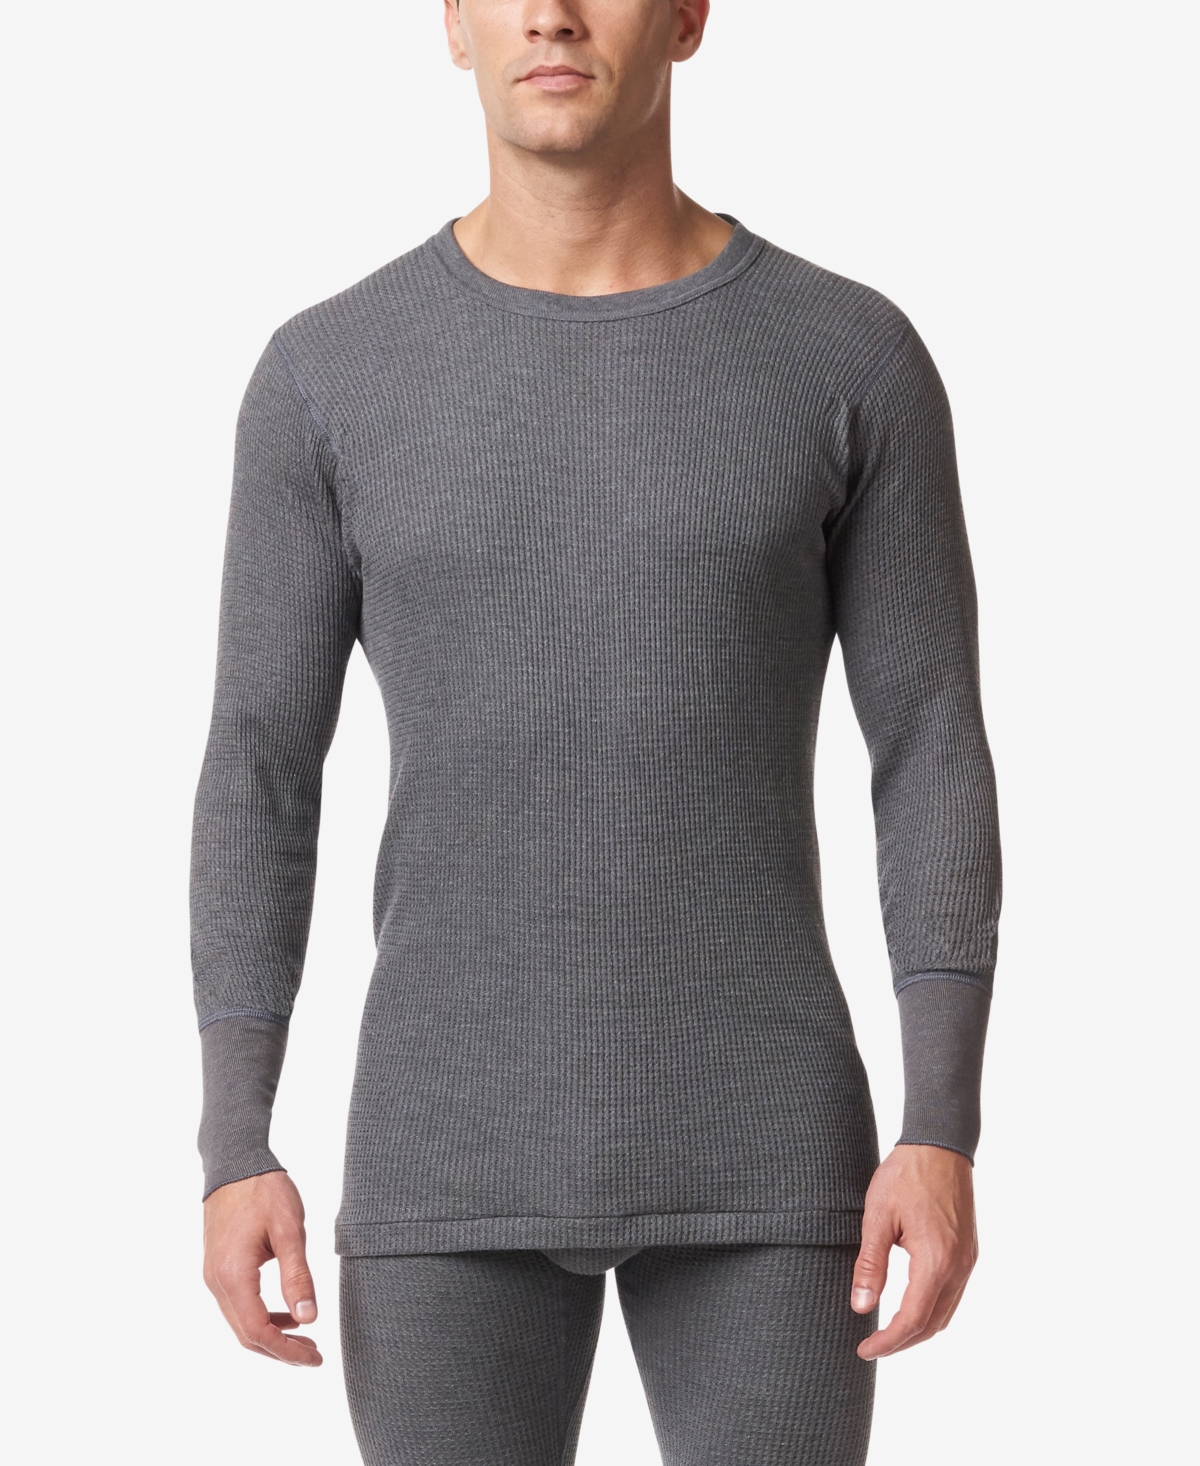 Men's Essentials Waffle Knit Thermal Long Sleeve Undershirt - Charcoal Mix